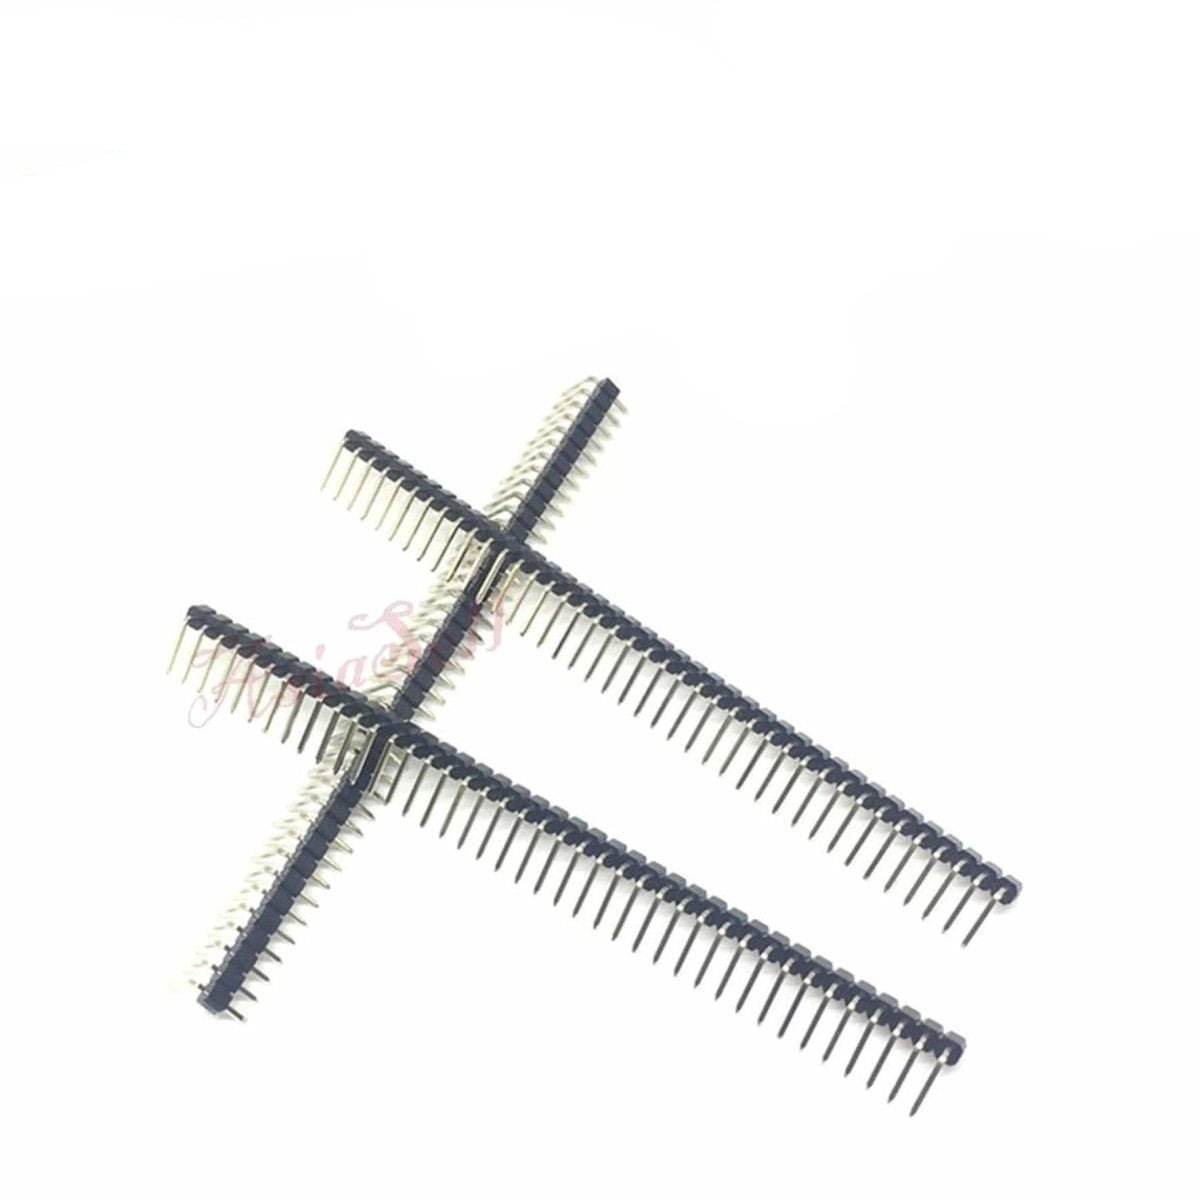 10pcs 40 Pin 1x40 Single Row Female Male 2.54mm Pitch Header Straight Right Angle Adapter - 10x Right Angle Male - - Asia Sell